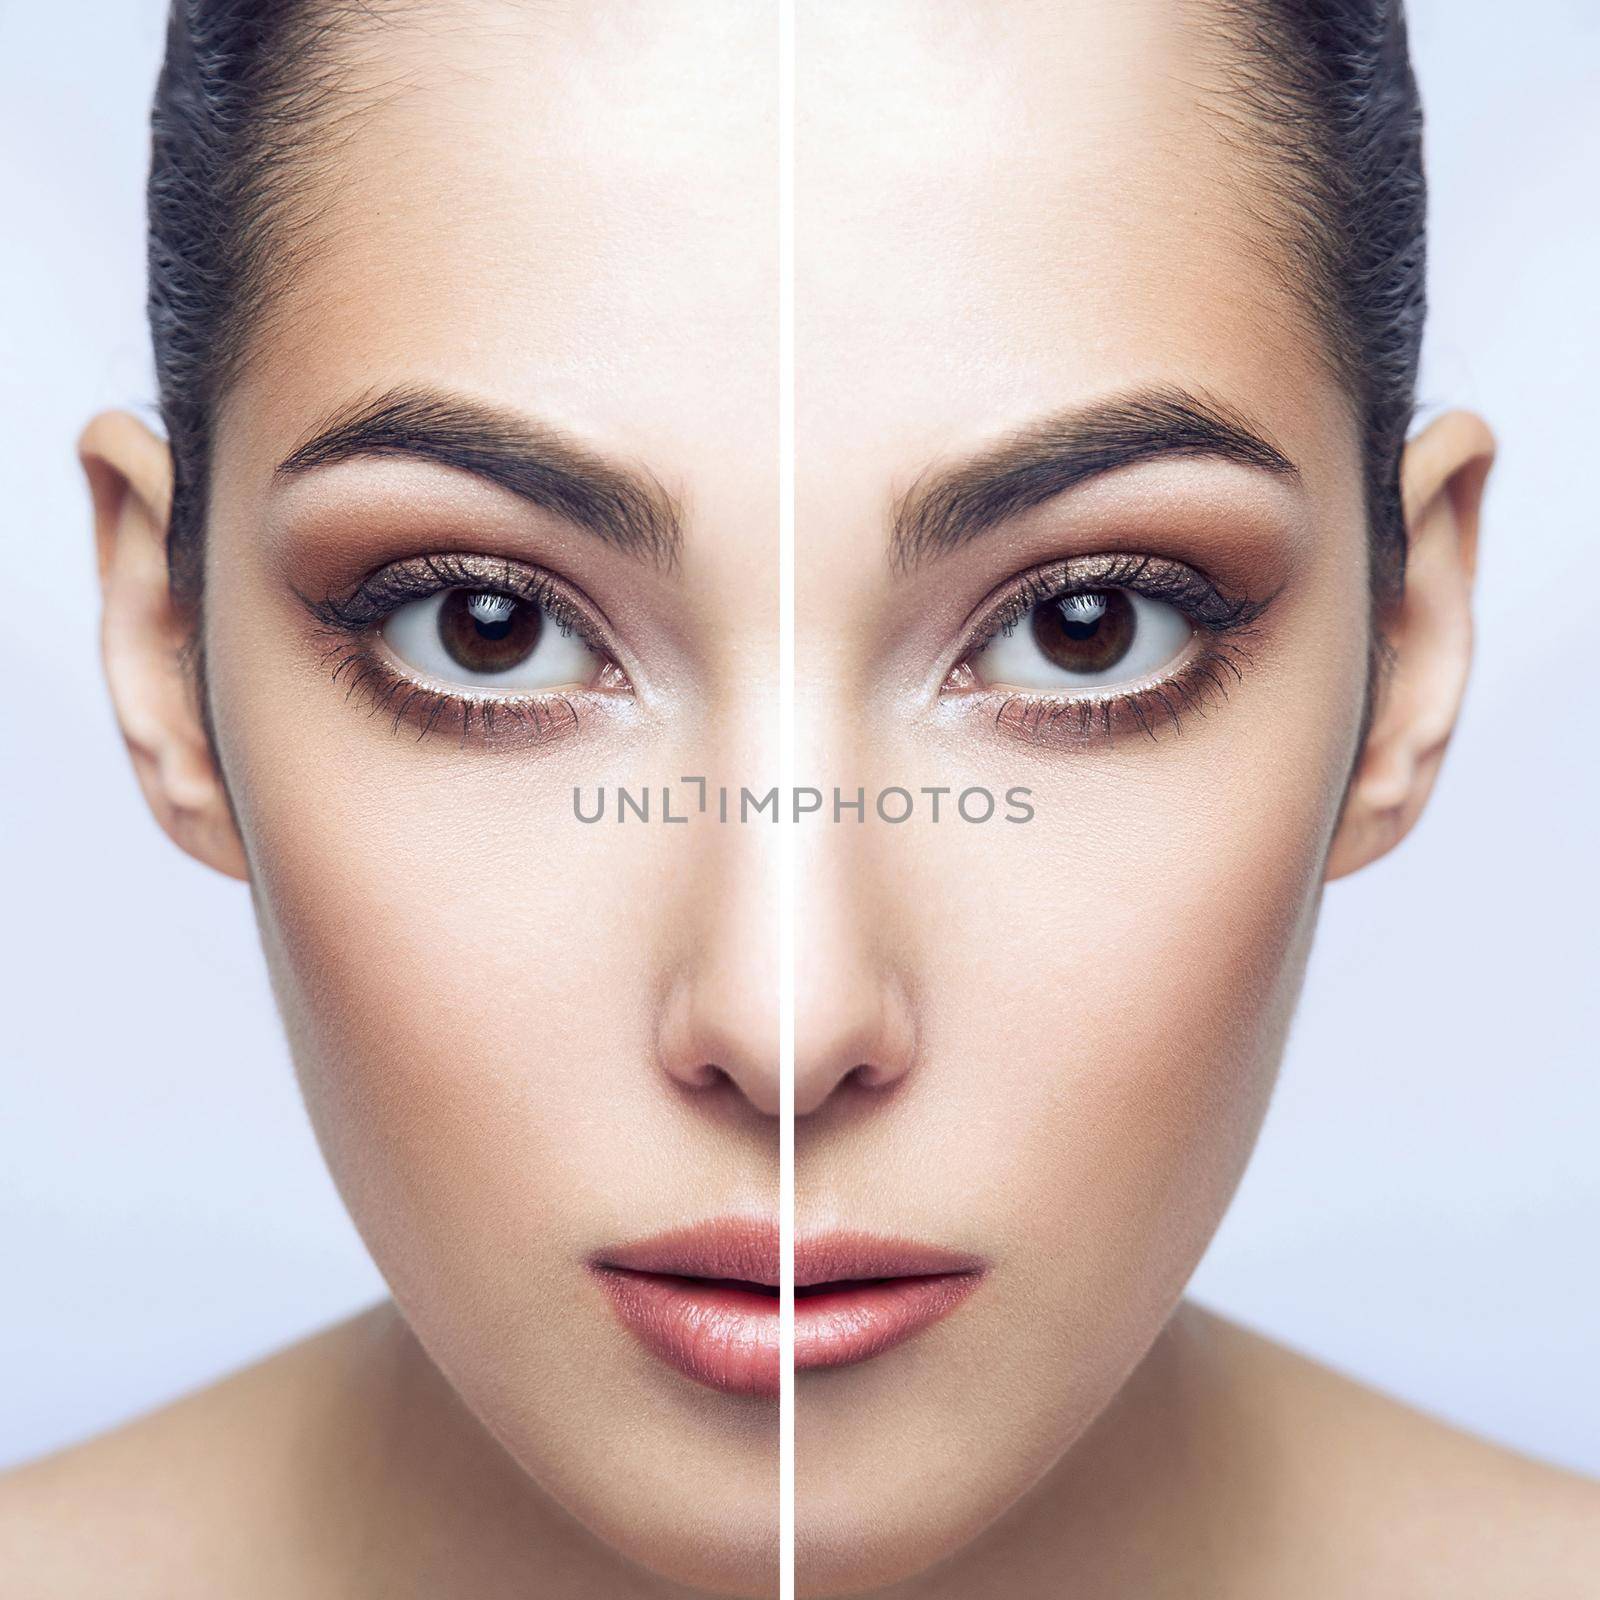 Before and after lip filler injections. Lip augmentation perfect lips. Closeup half portrait of beautiful brunette woman lips looking at camera. indoor studio shot, isolated on grey backgrond.